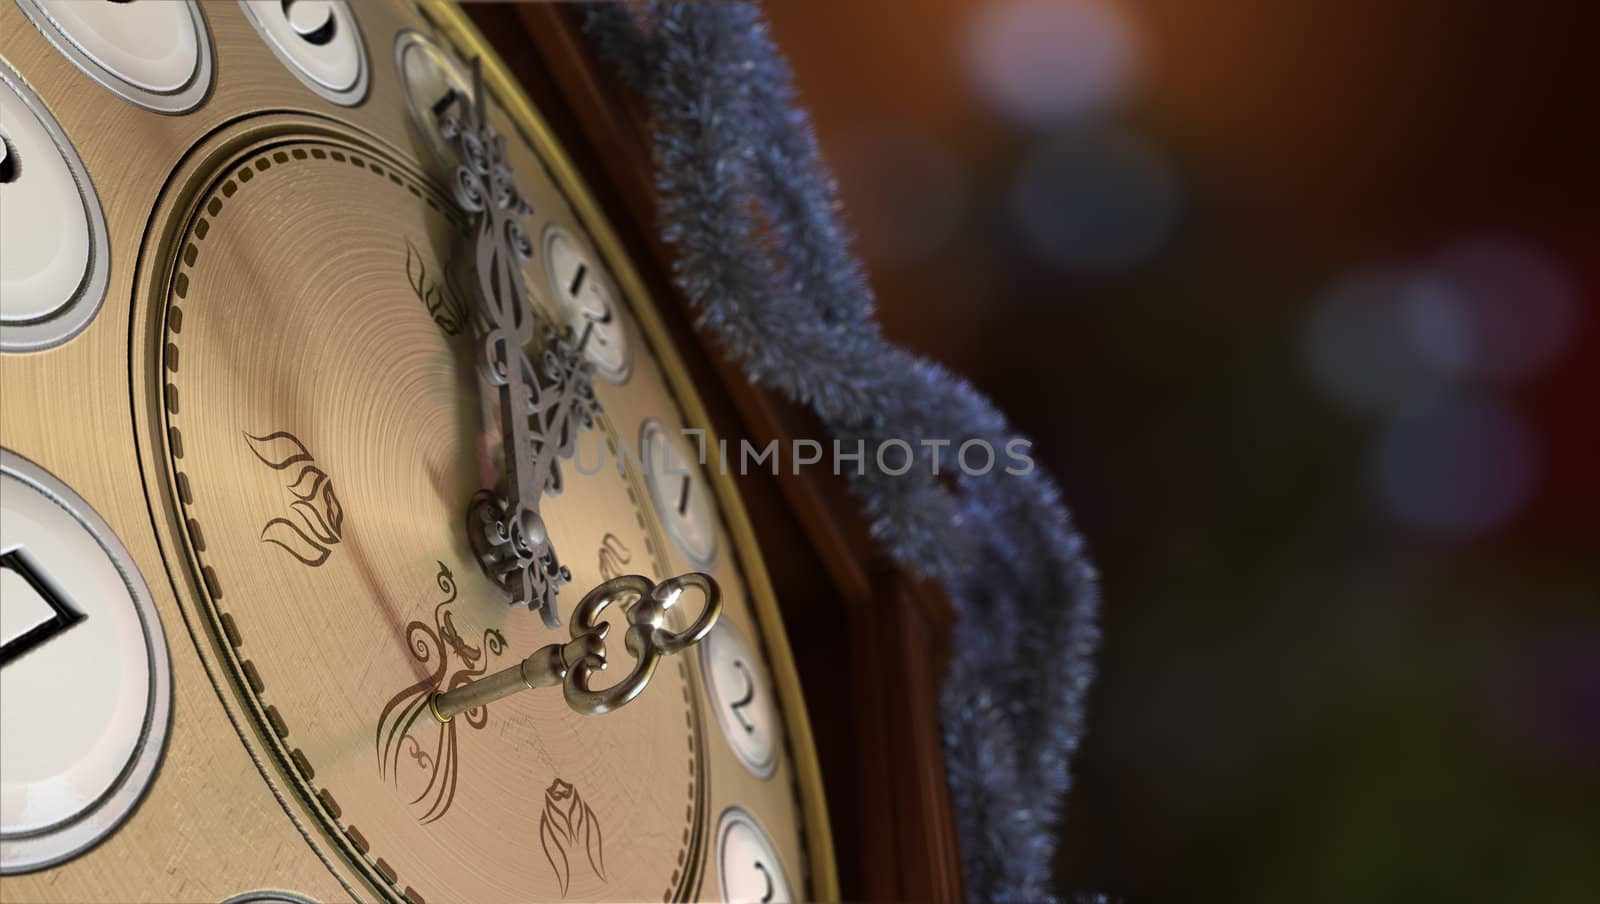 Happy New Year and Merry Christmas background with old clock and key